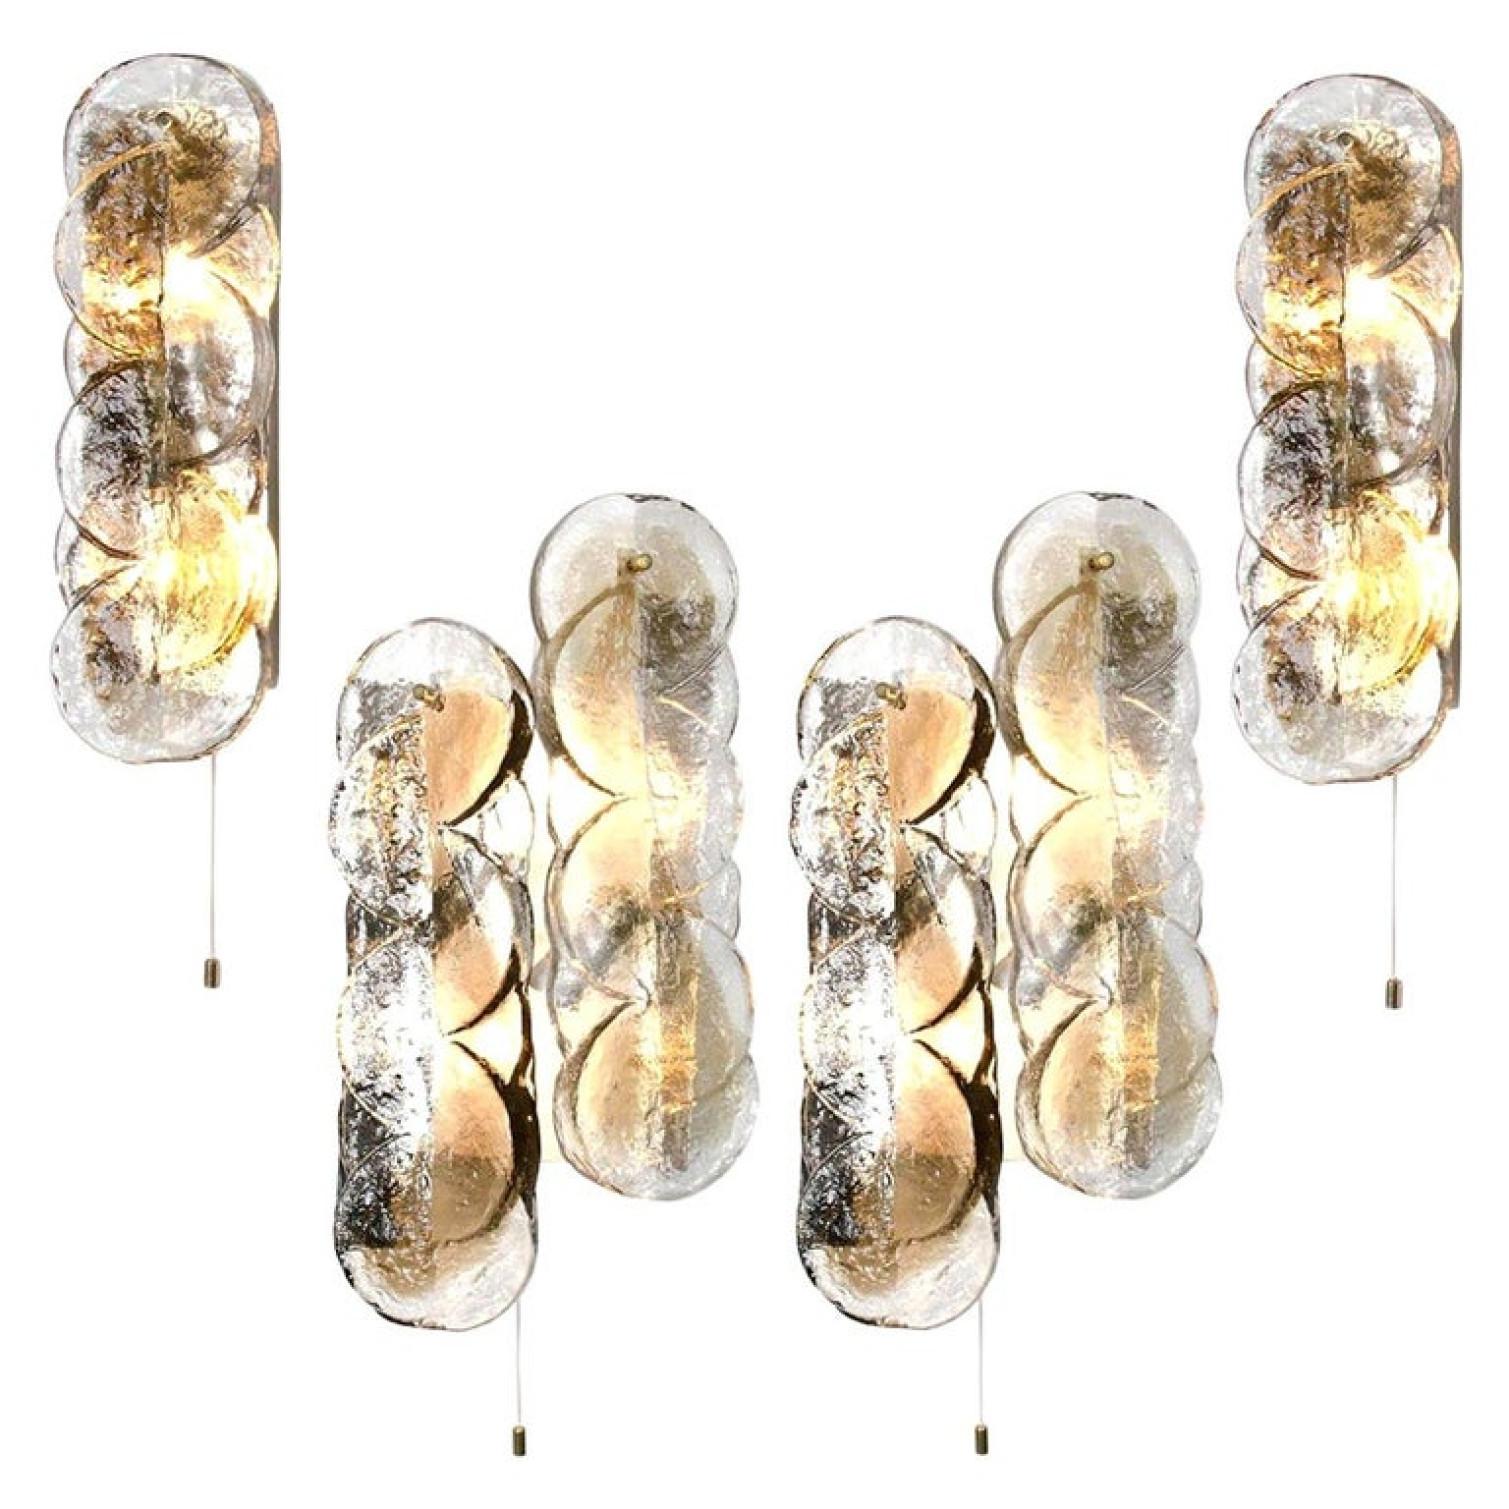 1 of the 4 Kalmar swirl sconces with clear glass panels with light goldfish amber colored stripe in it. Beautiful, thick textured glass is complimented by white metal hardware. Beautiful brass knobs.

Please notice the price is for 1 piece. The